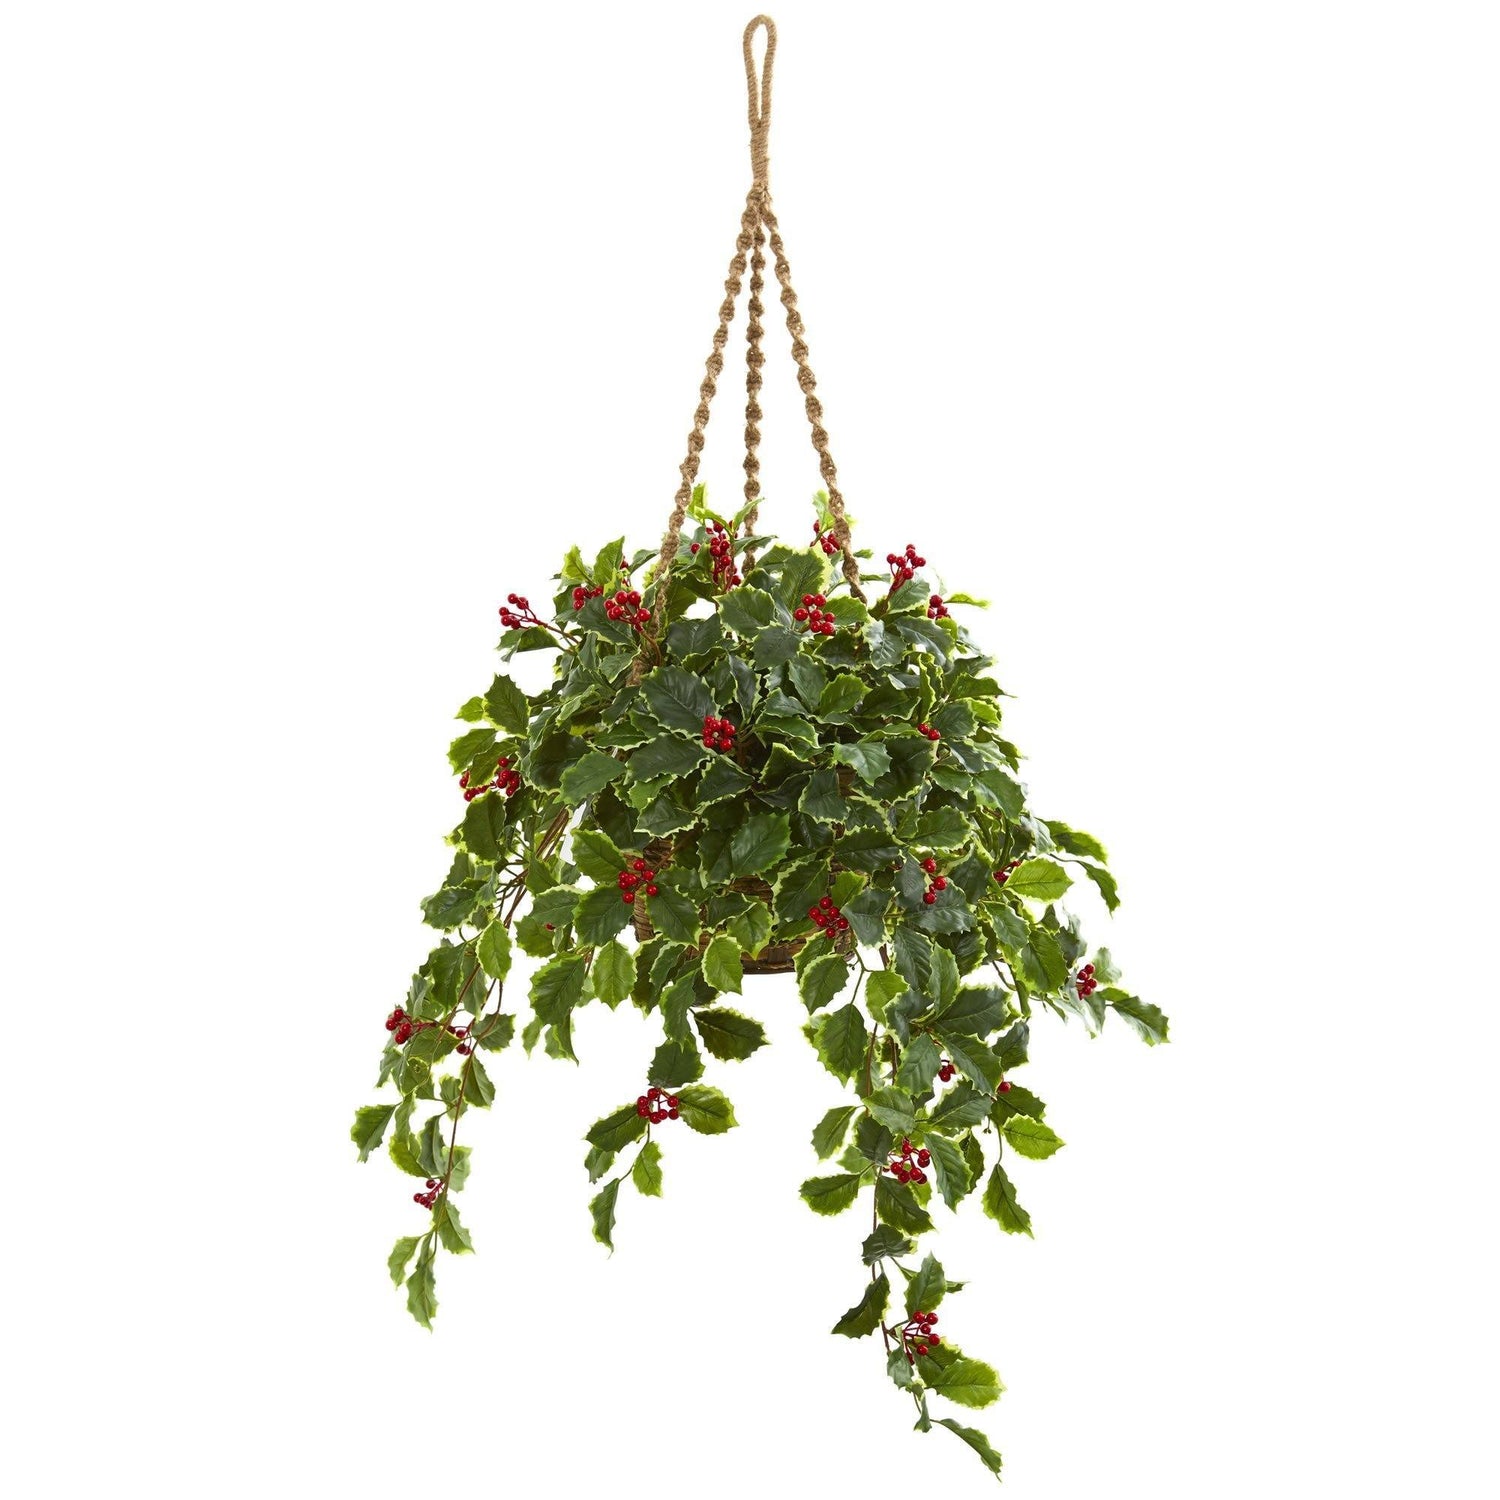 40” Variegated Holly with Berries Artificial Plant in Hanging Basket (Real Touch)